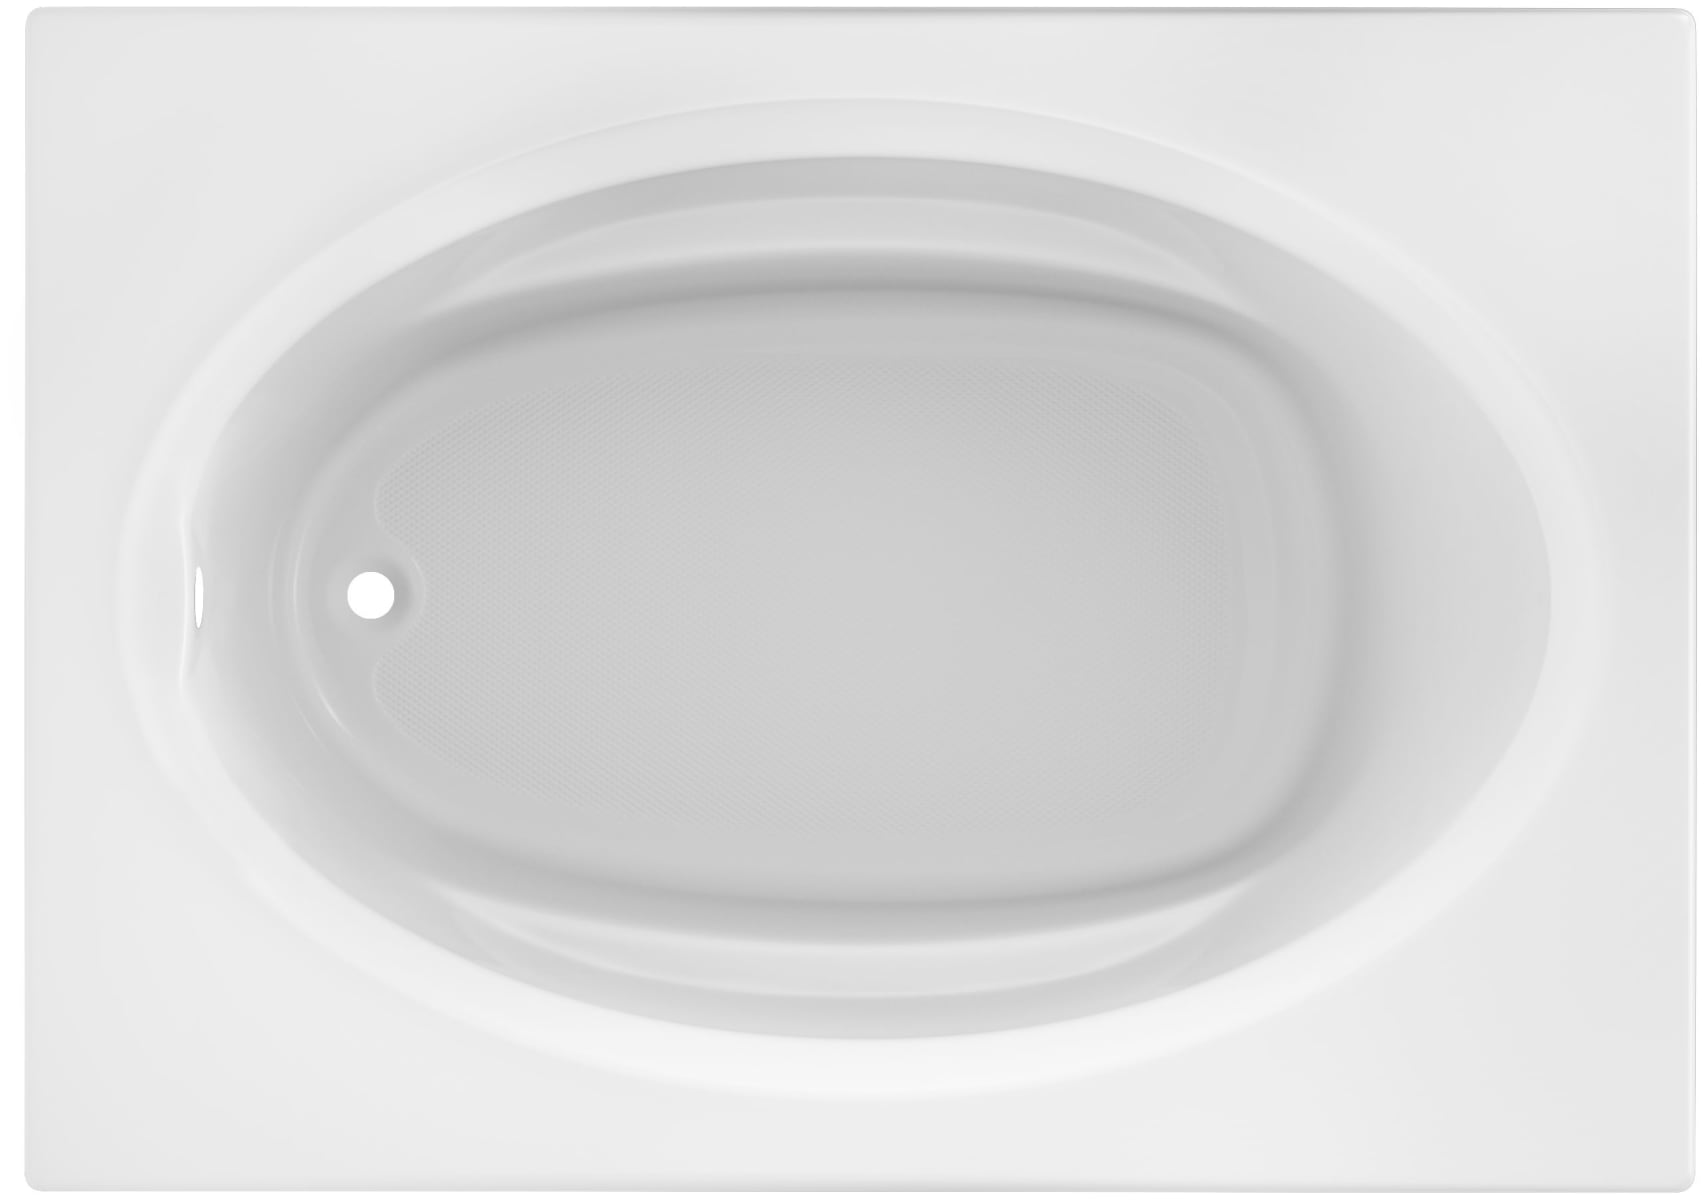 Jacuzzi J3d6042 WLR 1xx 60" X 42" Signature Drop in Whirlpool Bathtub With 6 for sale online 